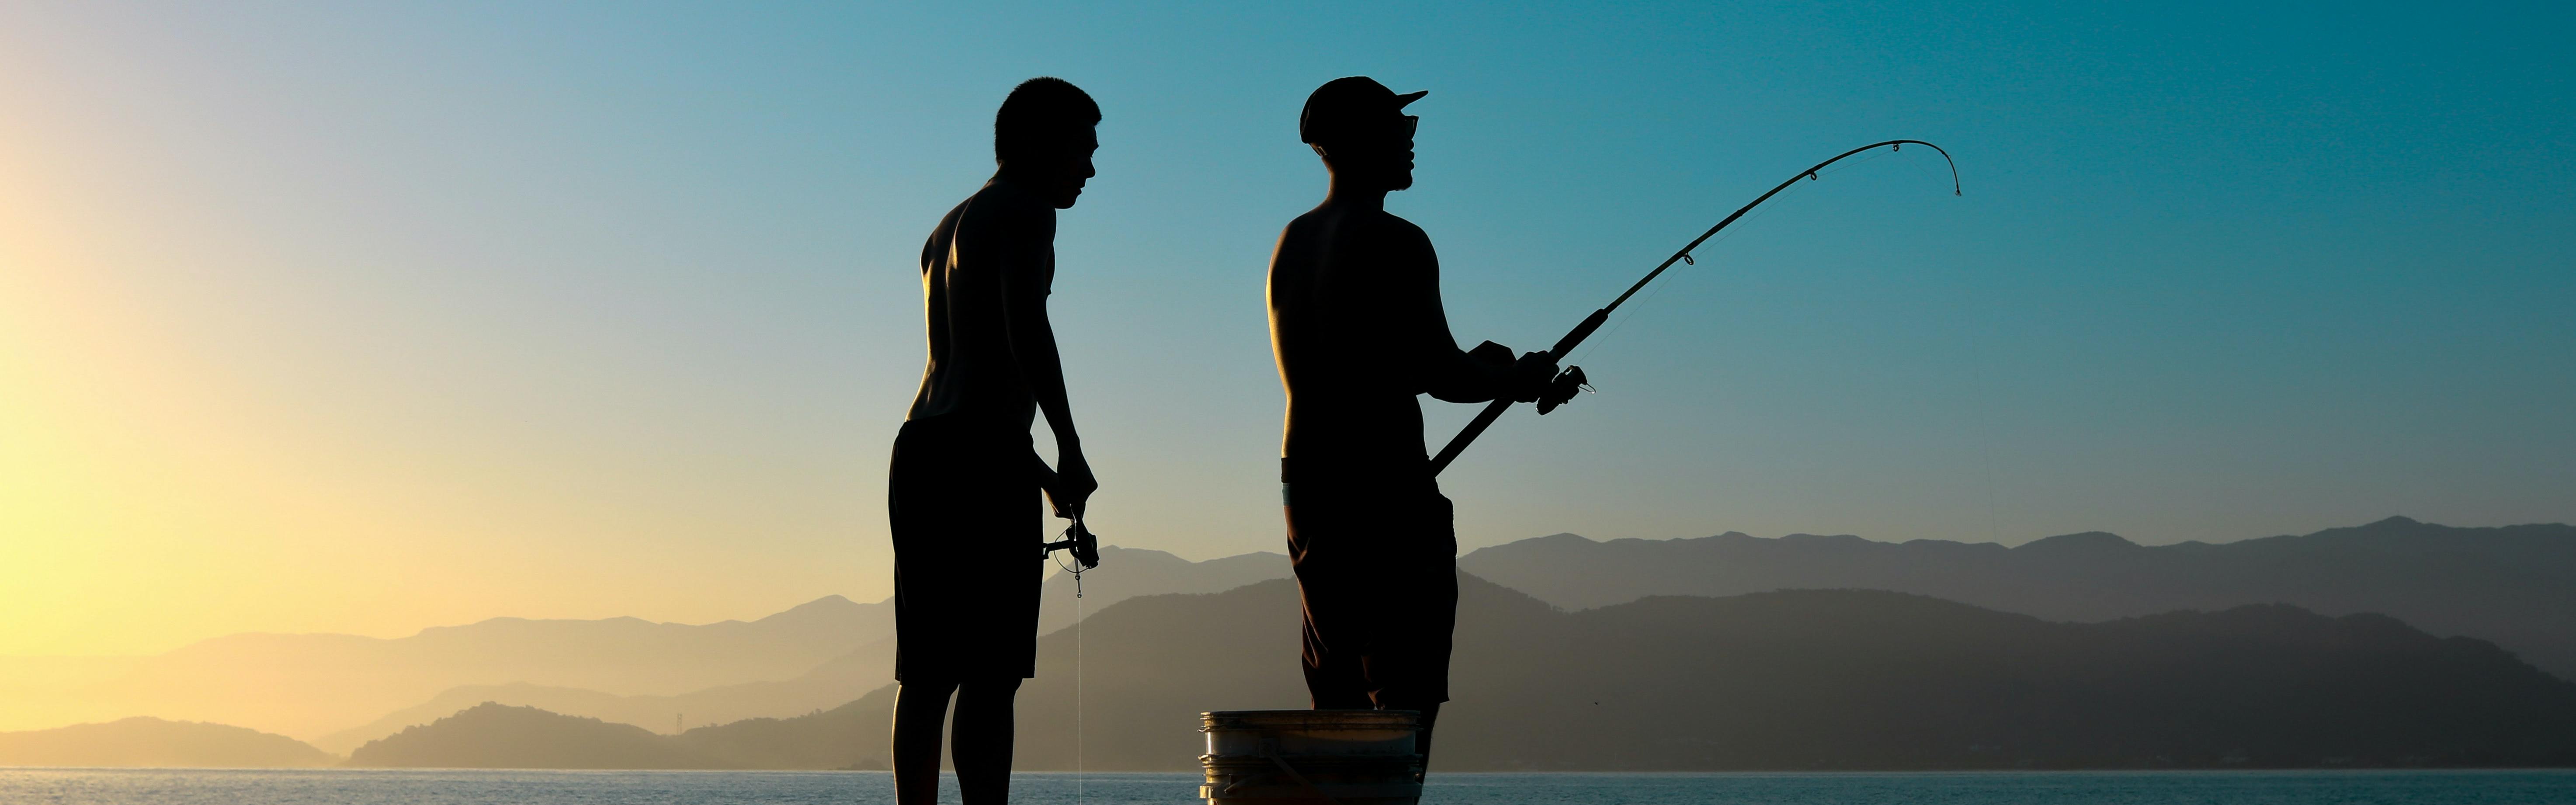 Two people standing on a pier fishing